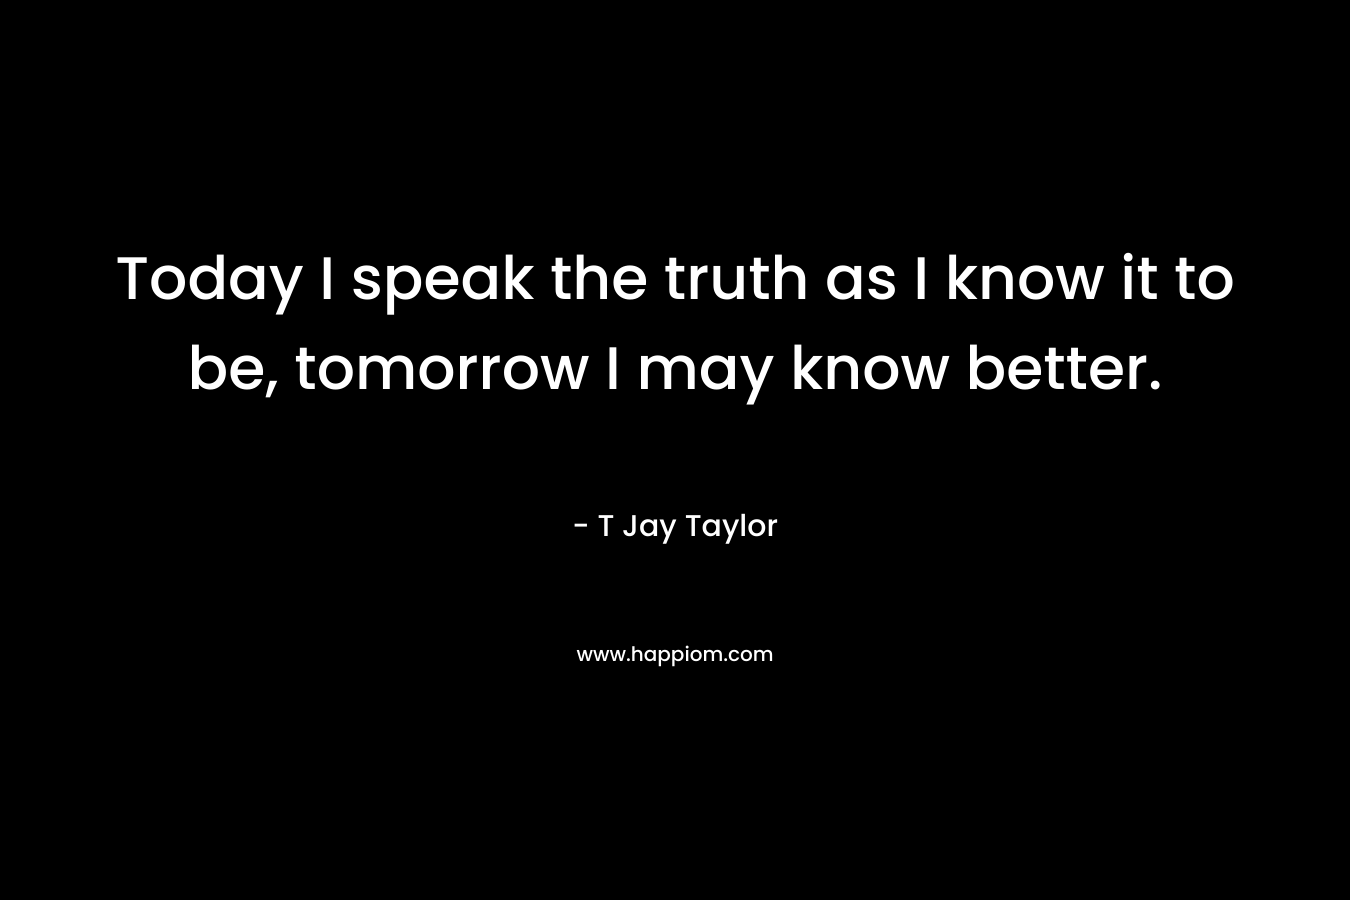 Today I speak the truth as I know it to be, tomorrow I may know better. – T Jay Taylor